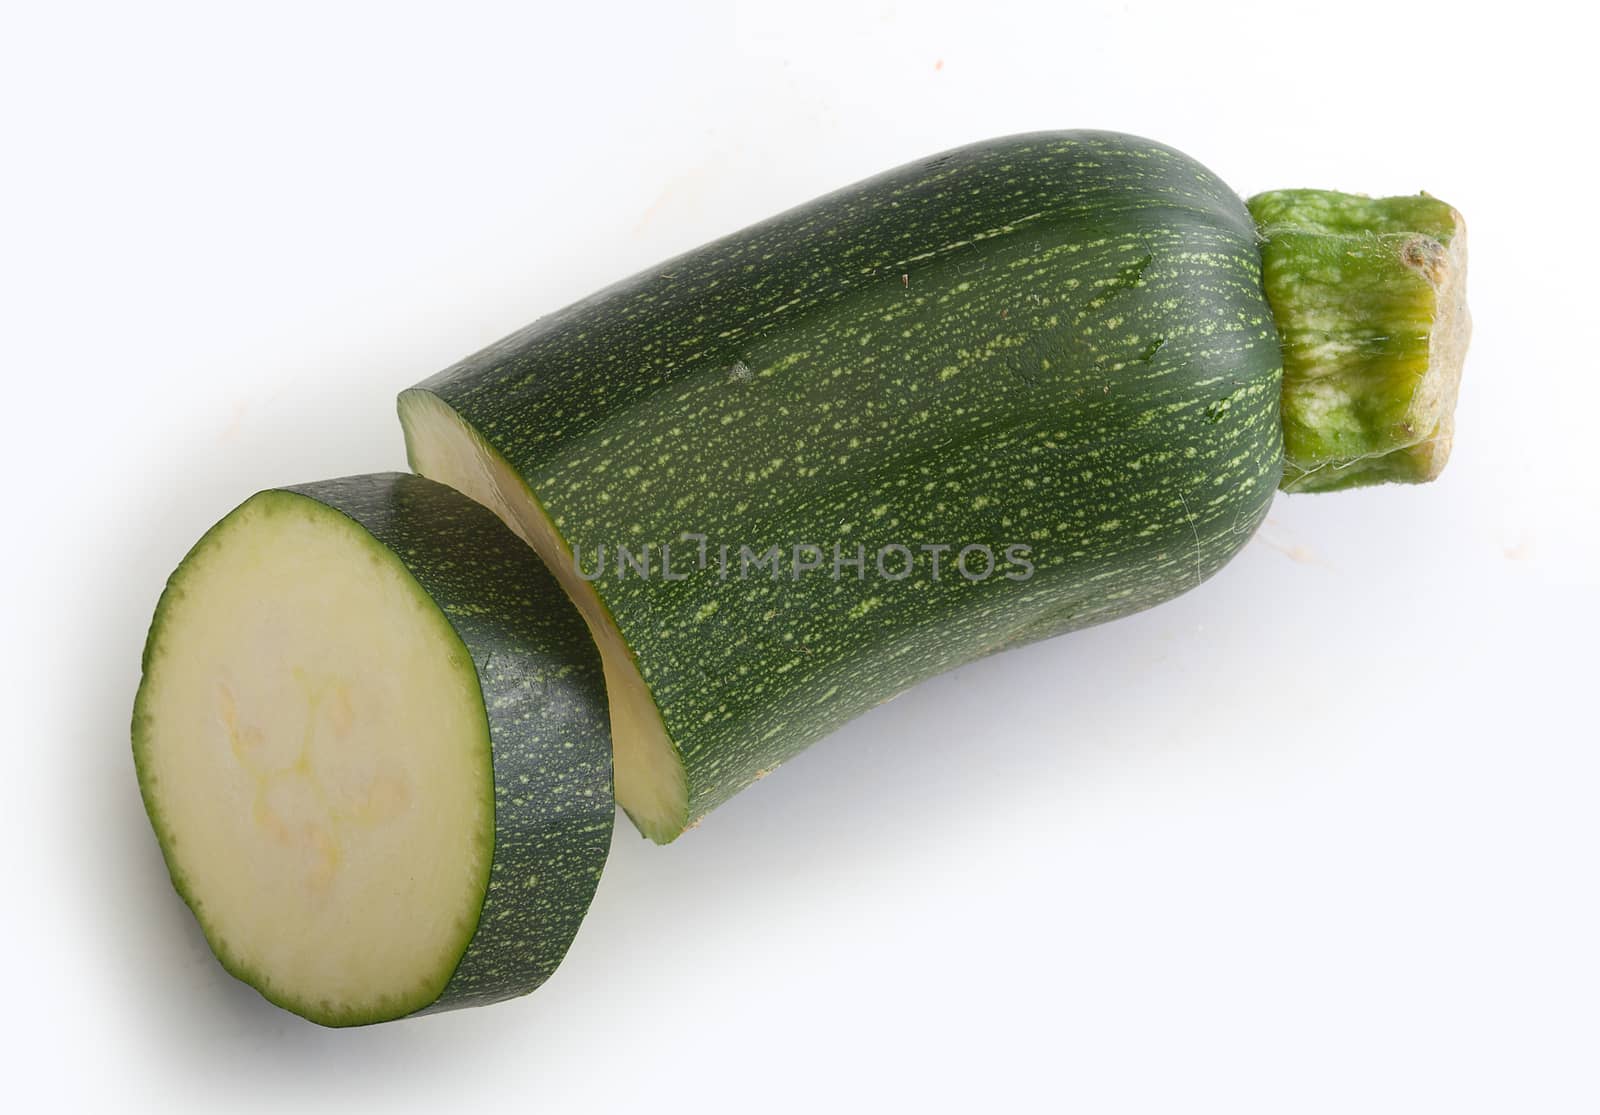 Isolated pieces of green zucchini on the white background